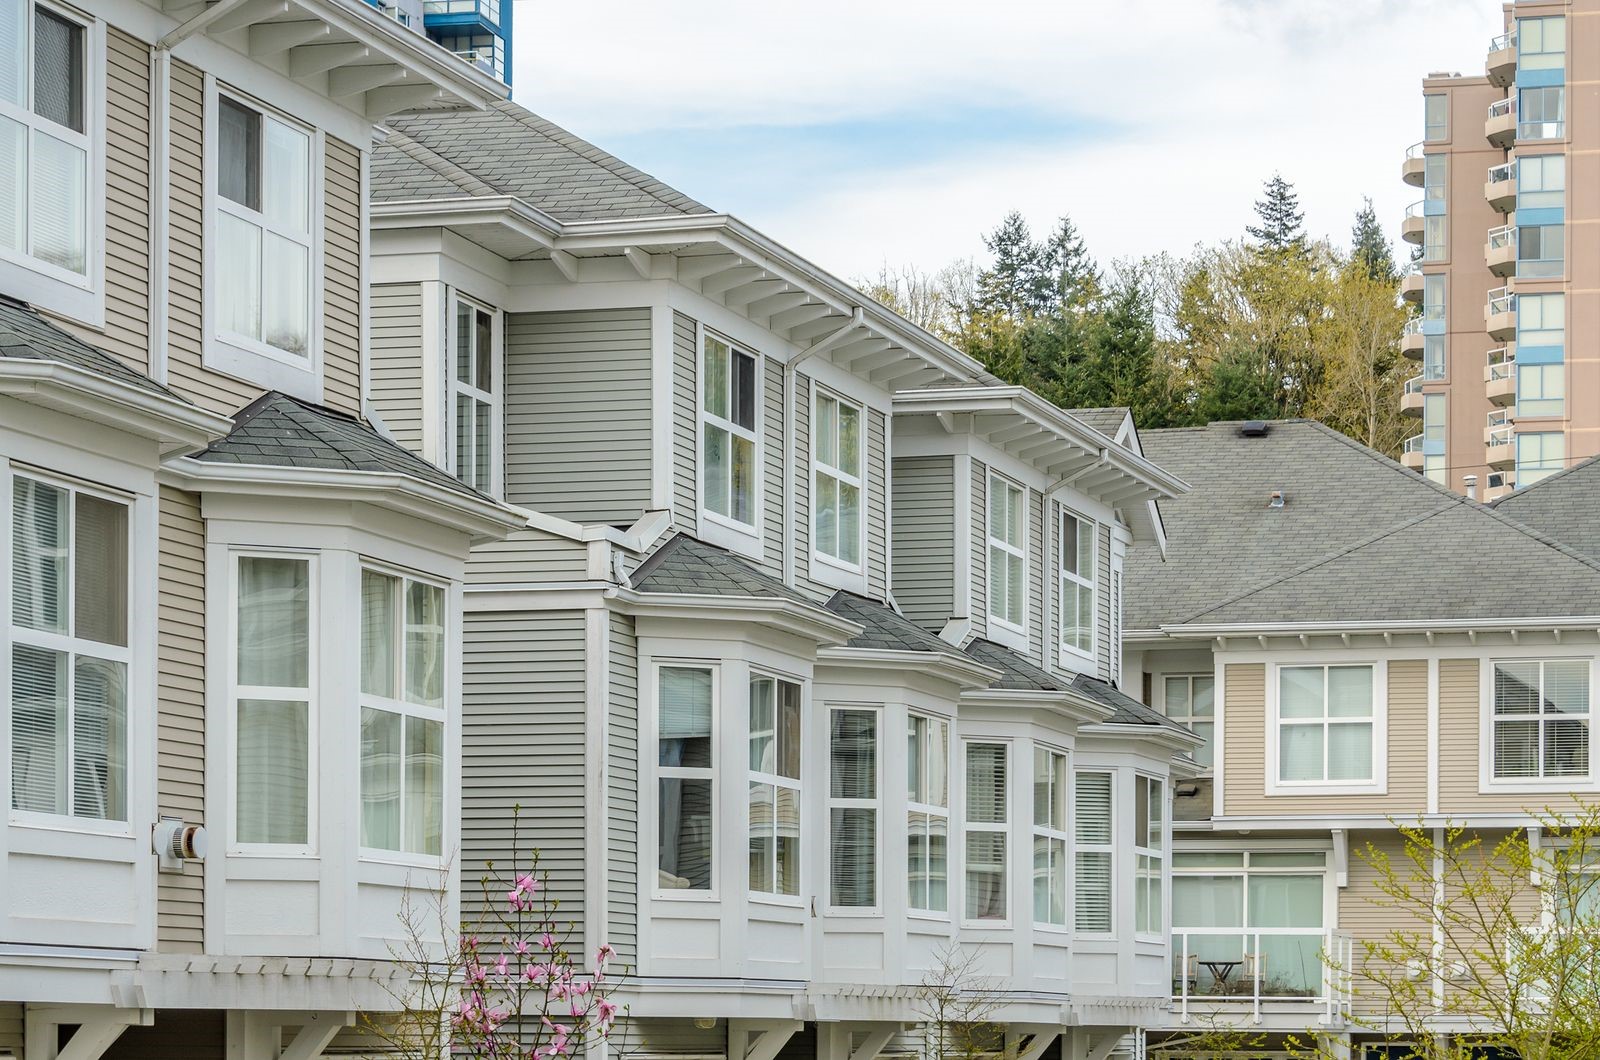 A Picture of an Attractive Townhouse Row in the British Columbia Area